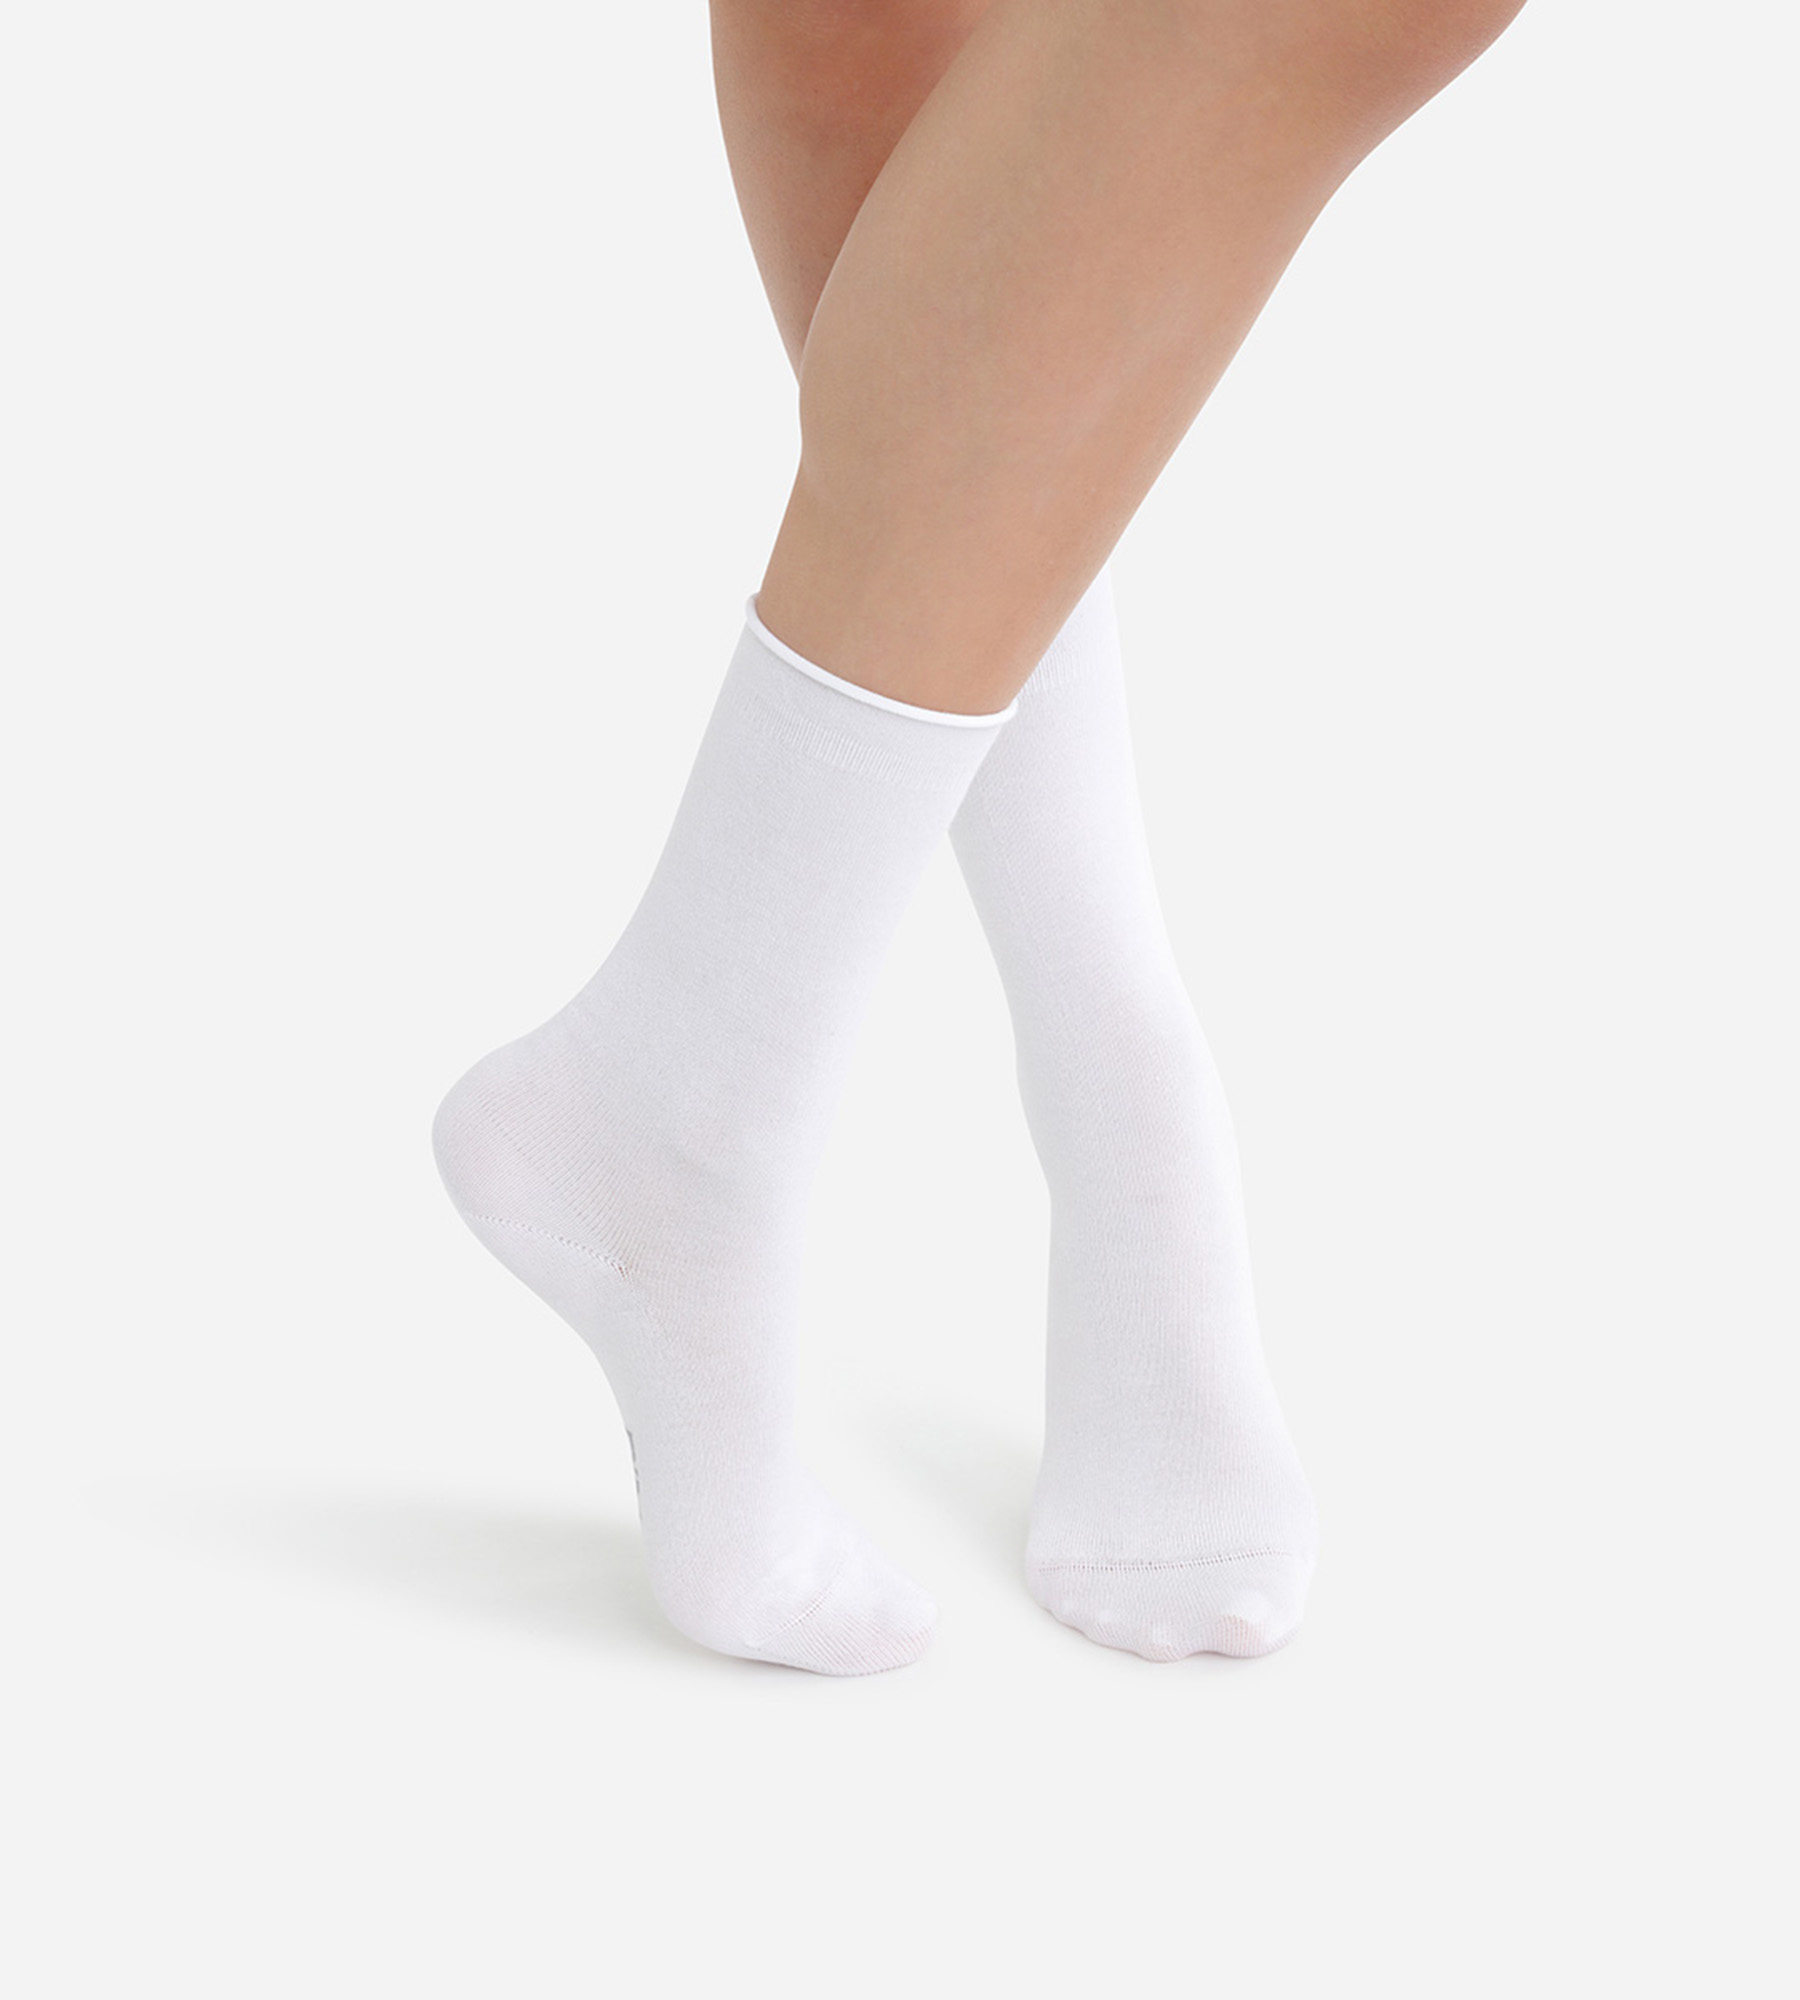 Quarter Socks Are a $5 Style Hack To Look Taller in 2023